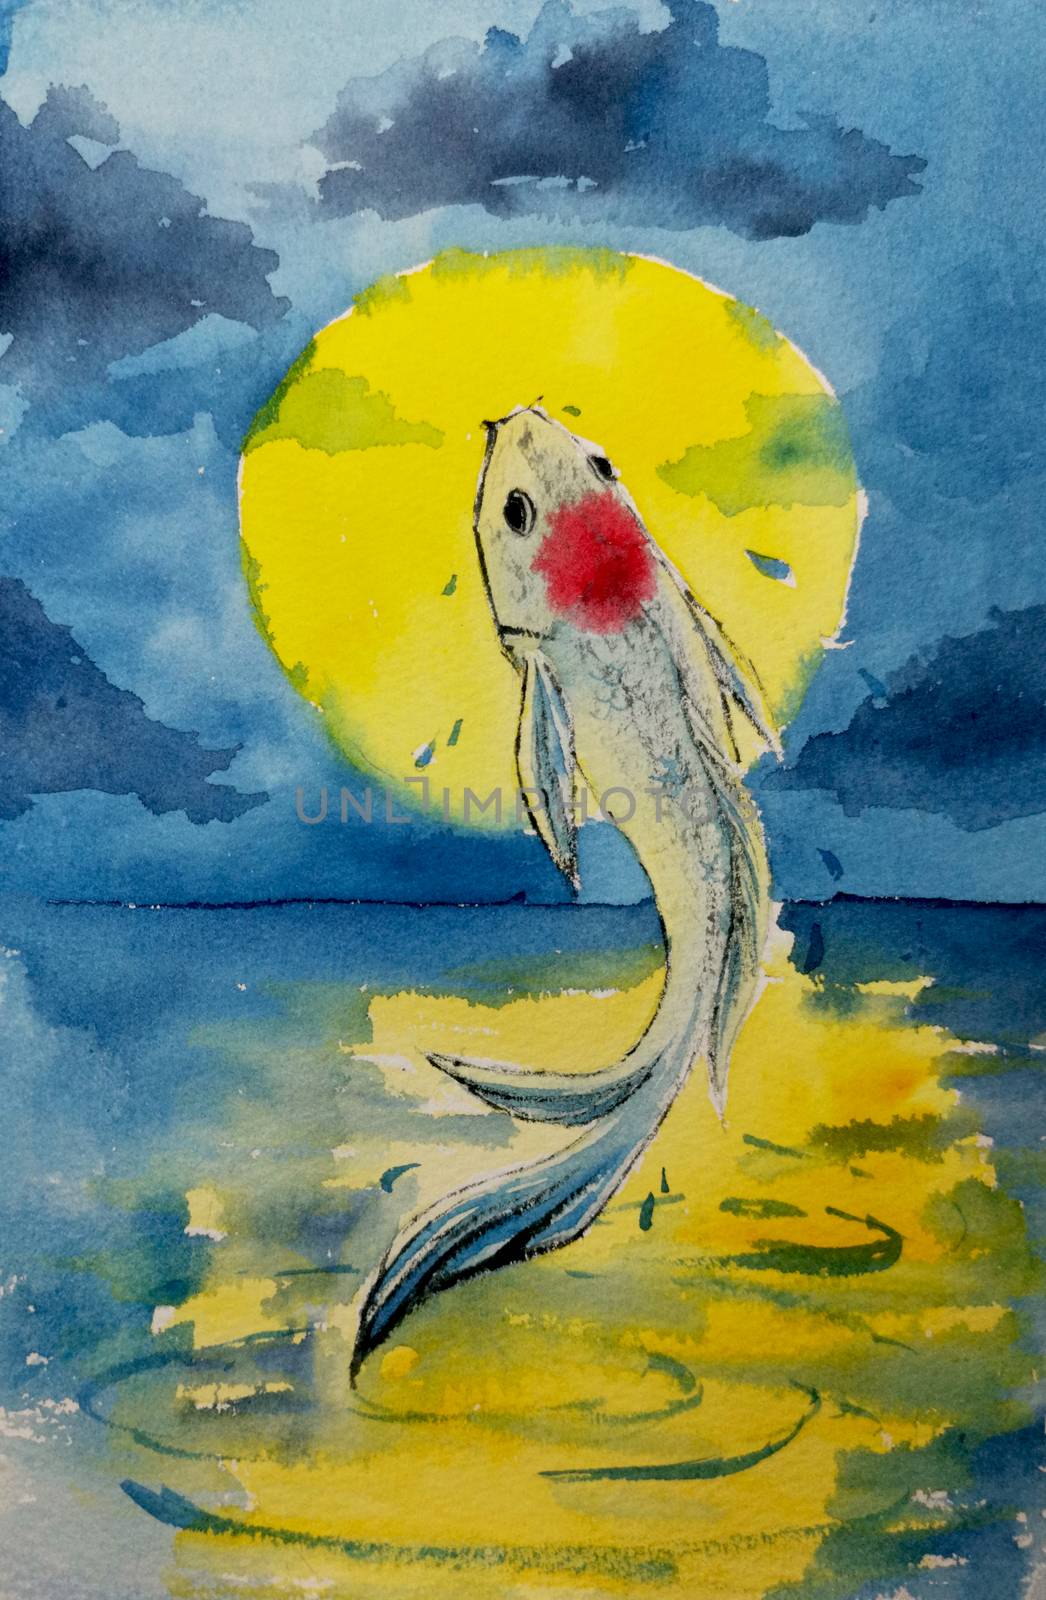 a koi fish jumped to the surface in fullmoon night. Watercolor hand painting. symbol of good luck and prosperity. by Ungamrung